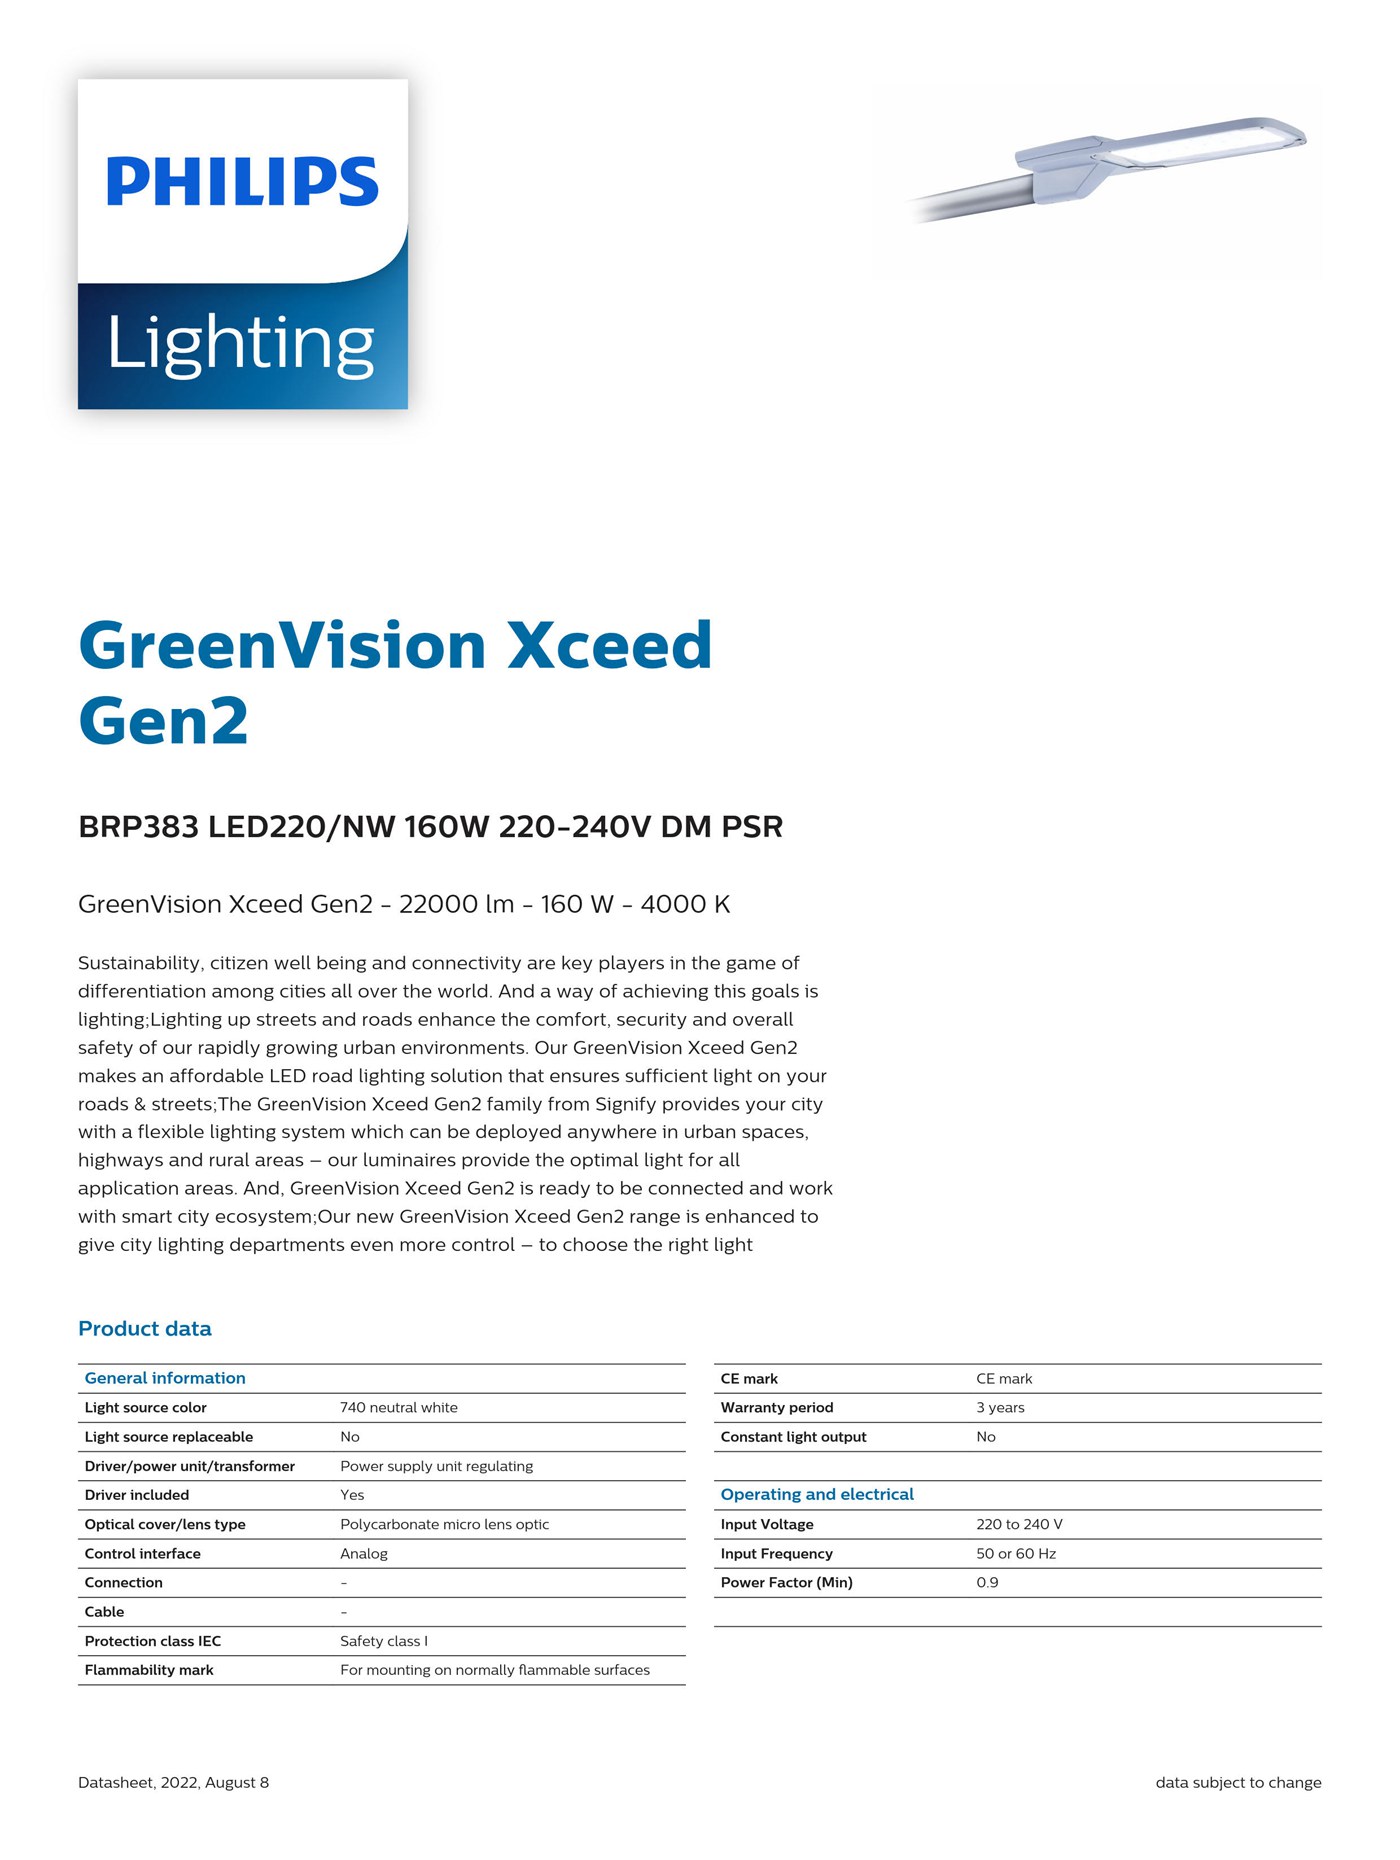 PHILIPS GreenVision Xceed Gen2 BRP383 LED220/NW 160W 220-240V DM PSR 911401875298